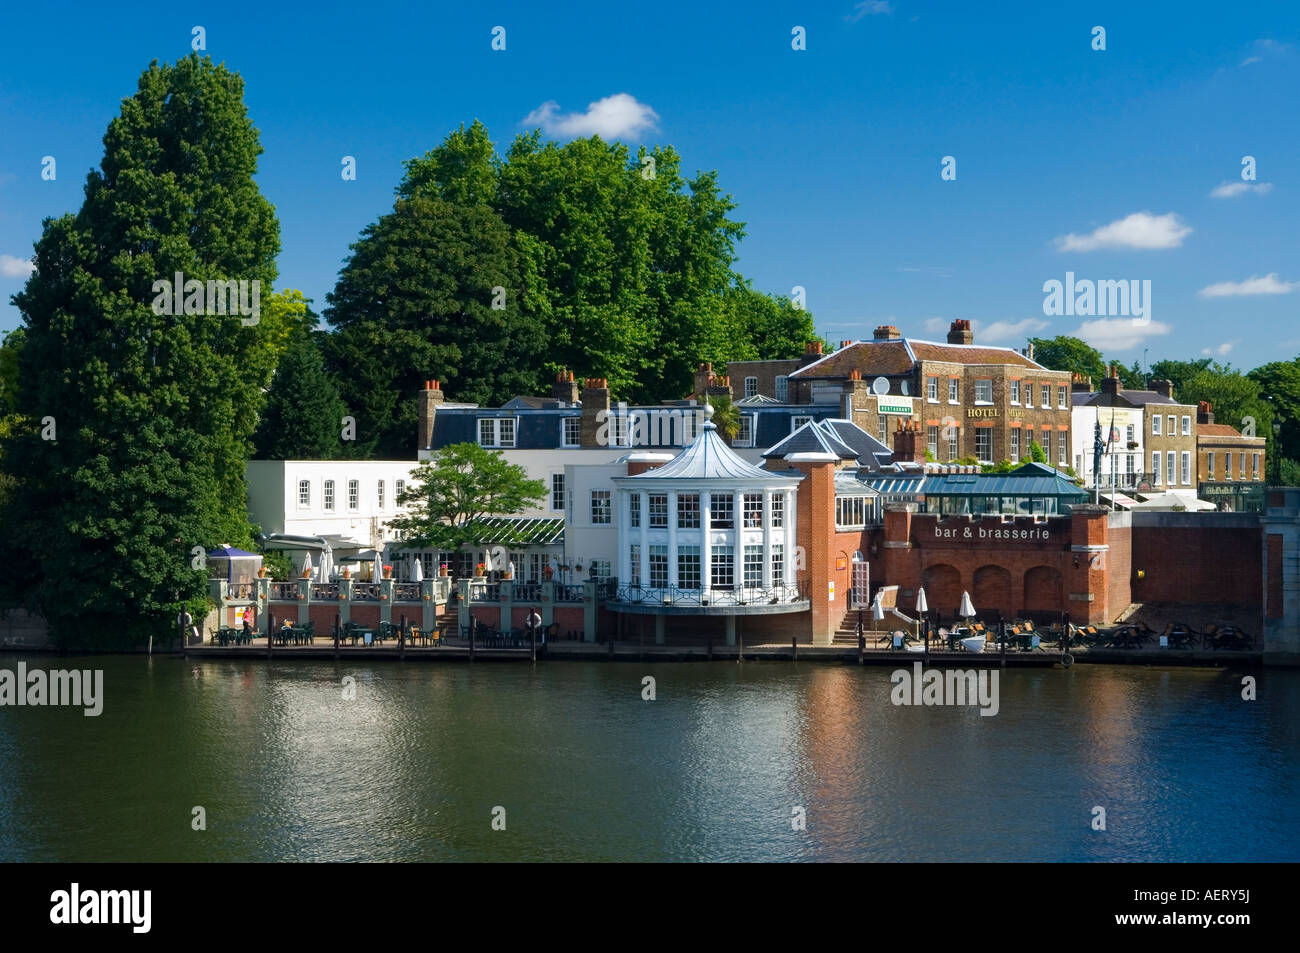 Carlton Mitre Hotel beside River Thames East Molesey Surrey England UK Stock Photo